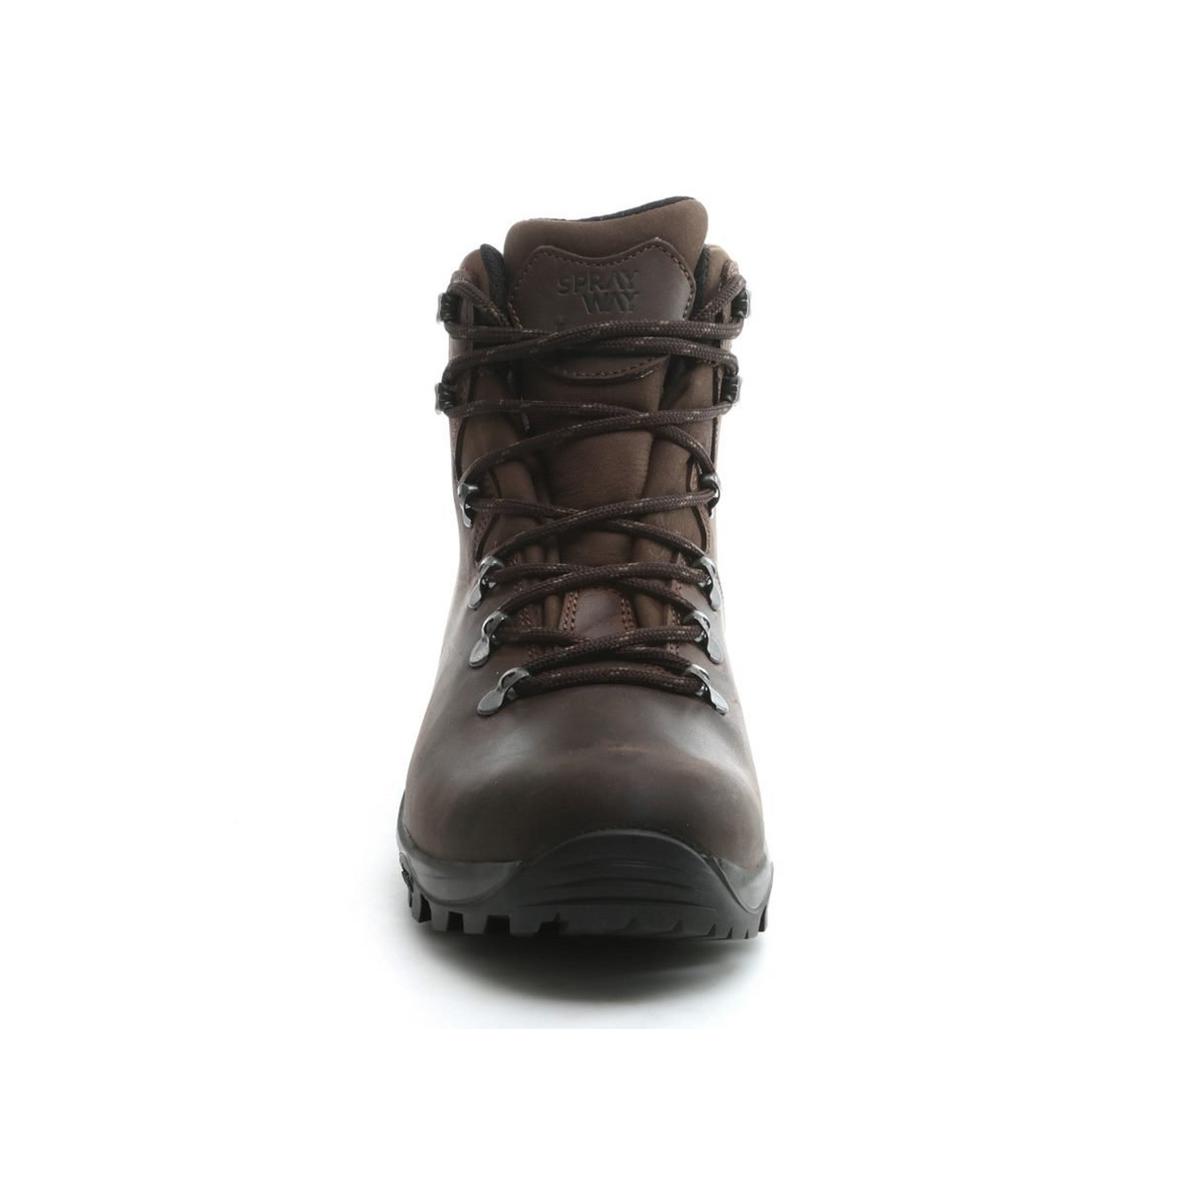 Sprayway Men's Canna Hiking Boots - Brown